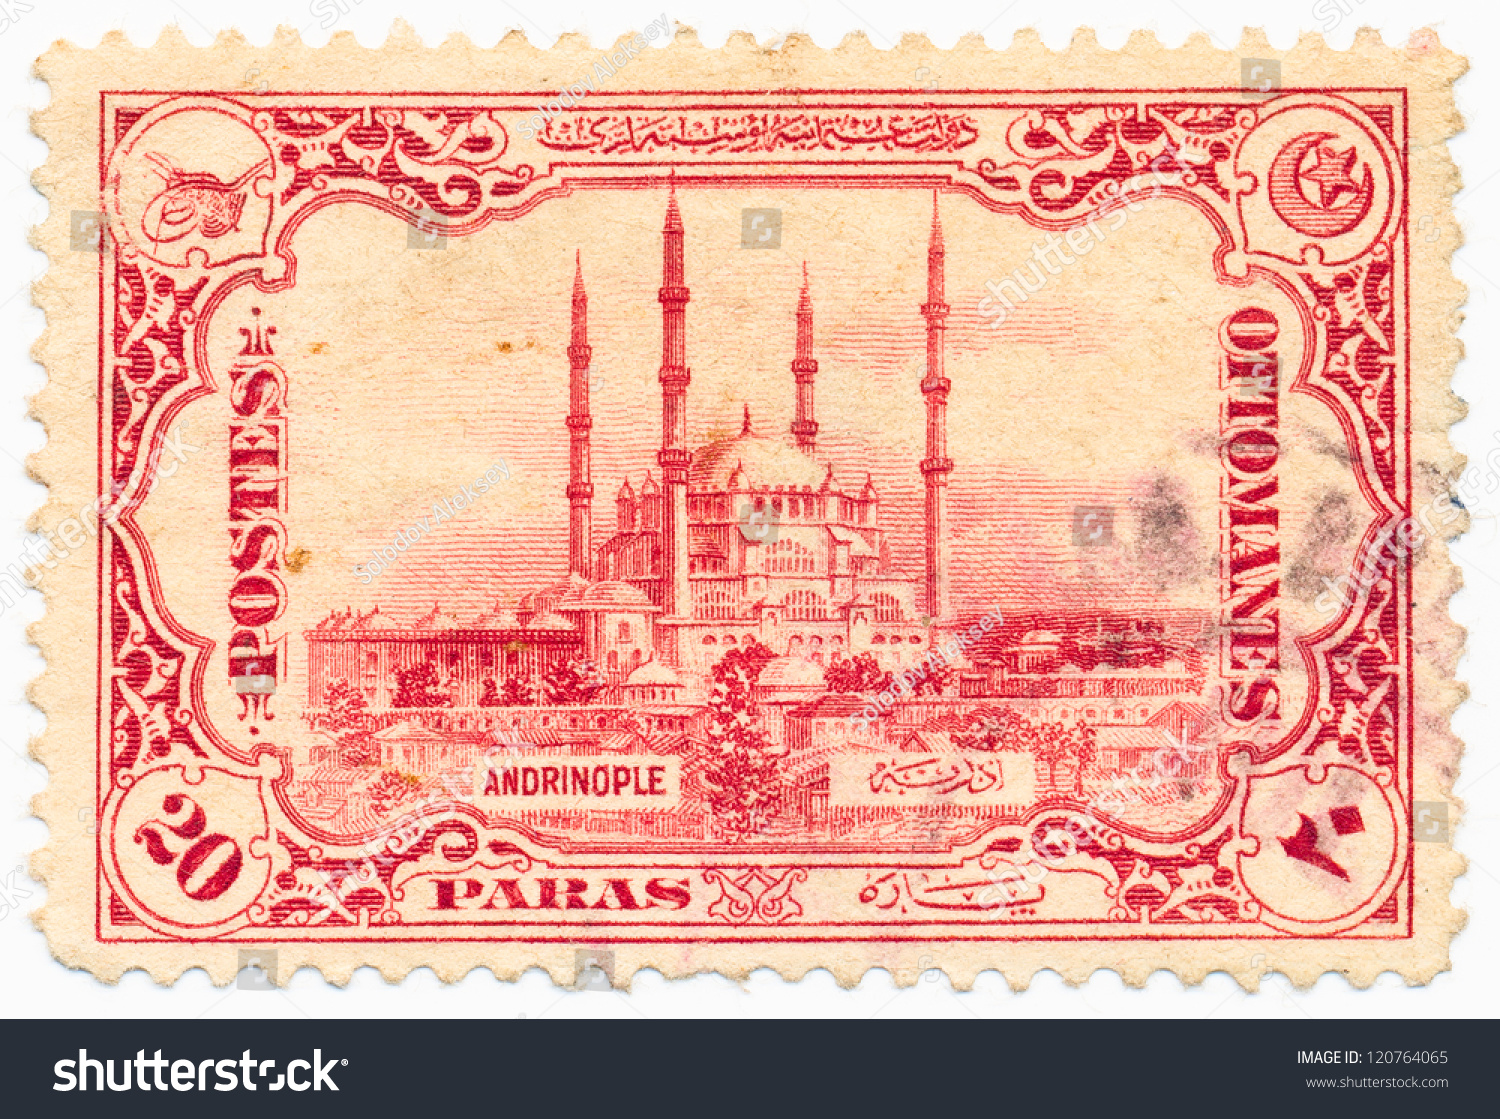 PHOTO MAGNET  Reproduction Turkey Selim Adrianople Mosque 1913 40 paras